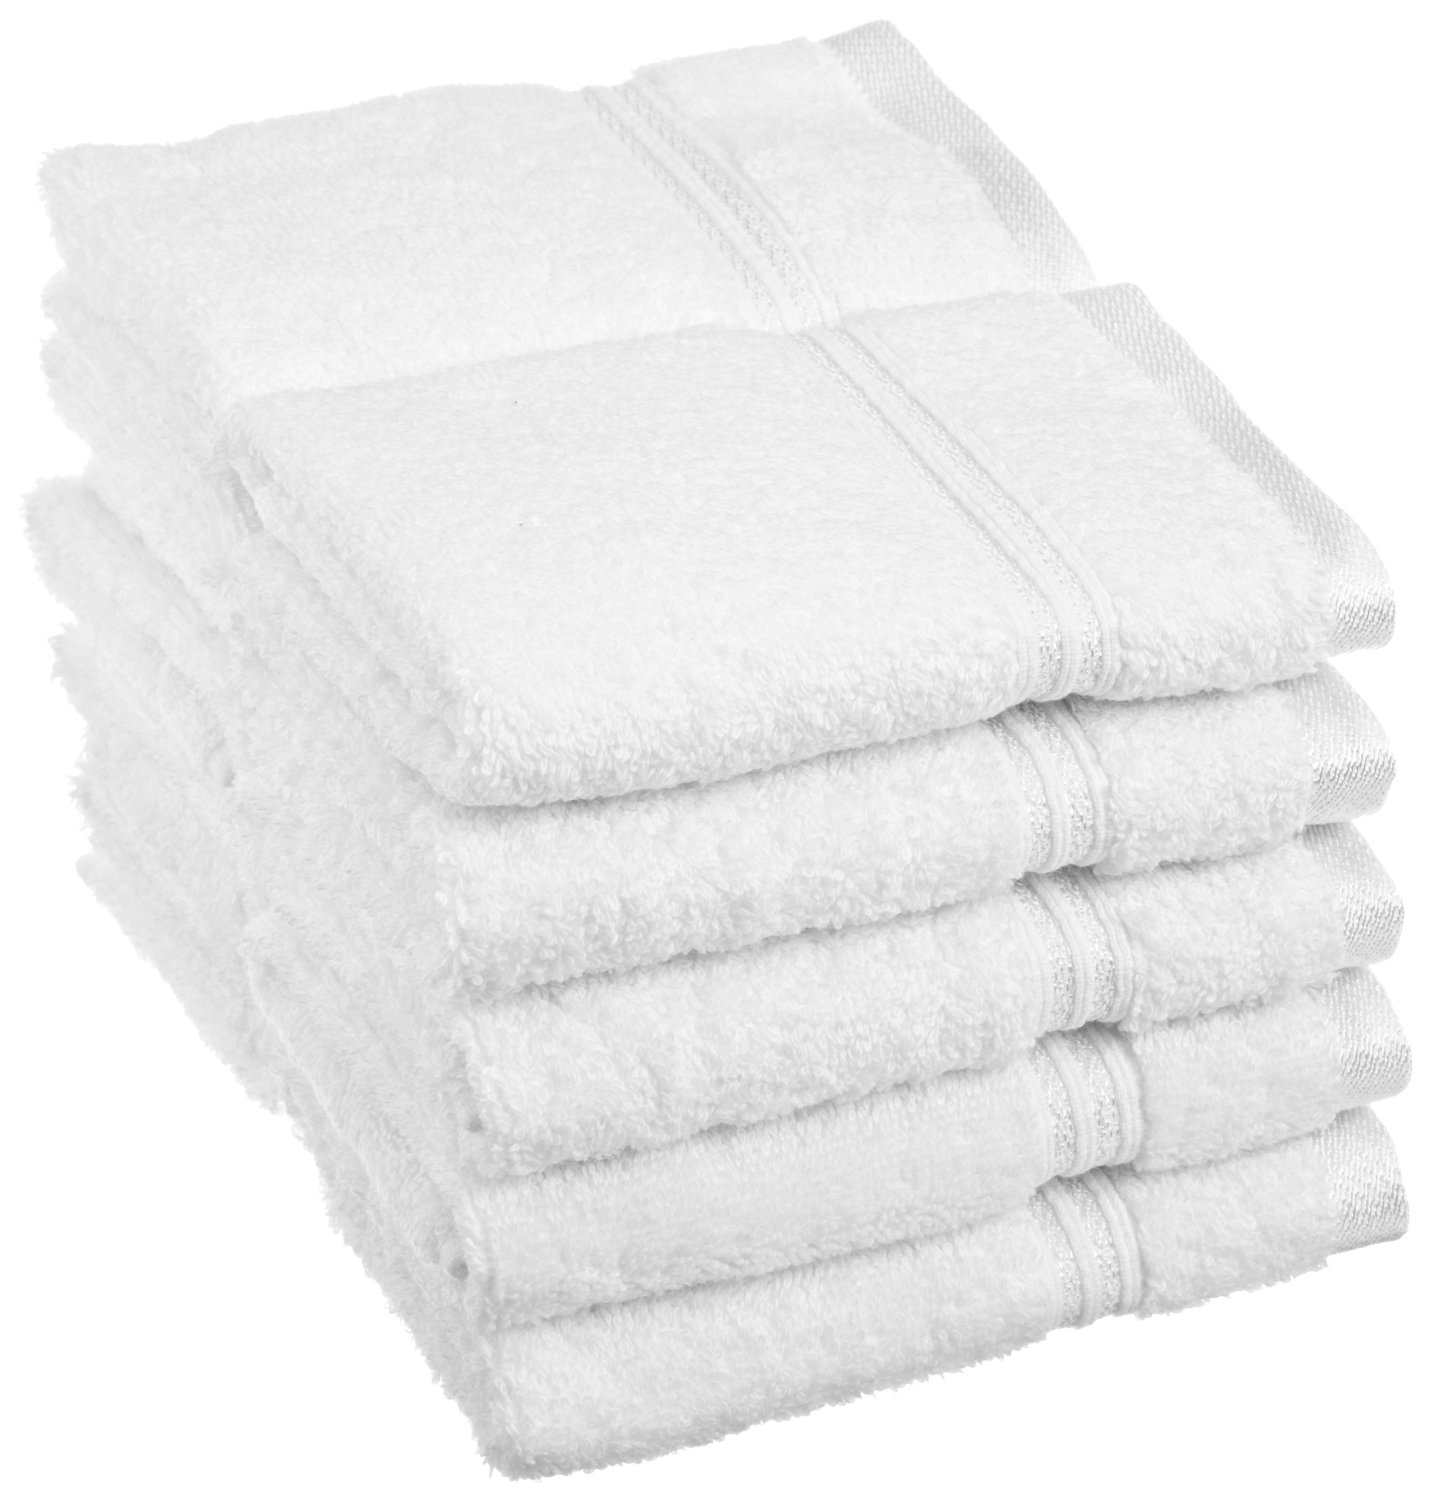 Hotel Face Towels. Highly Absorbent and Fast Dry